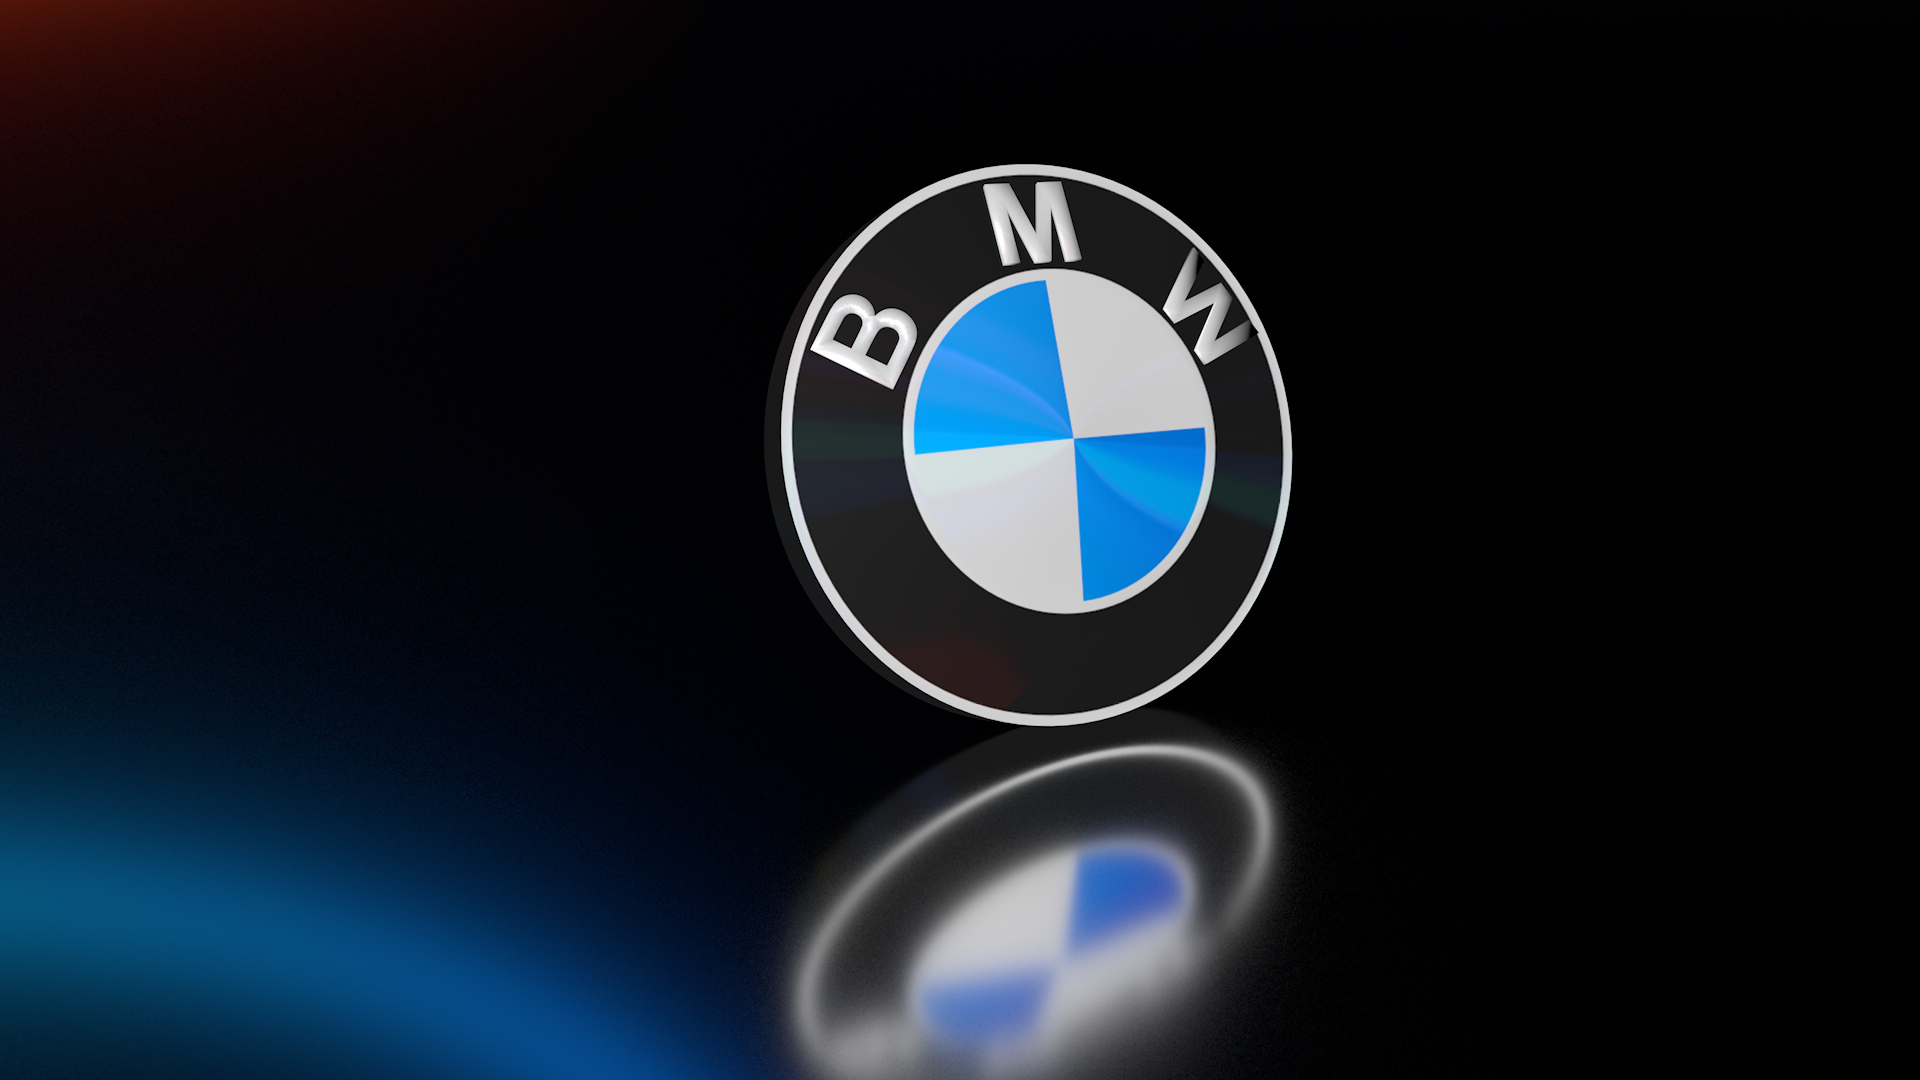 BMW Logo Wallpapers, Pictures, Images